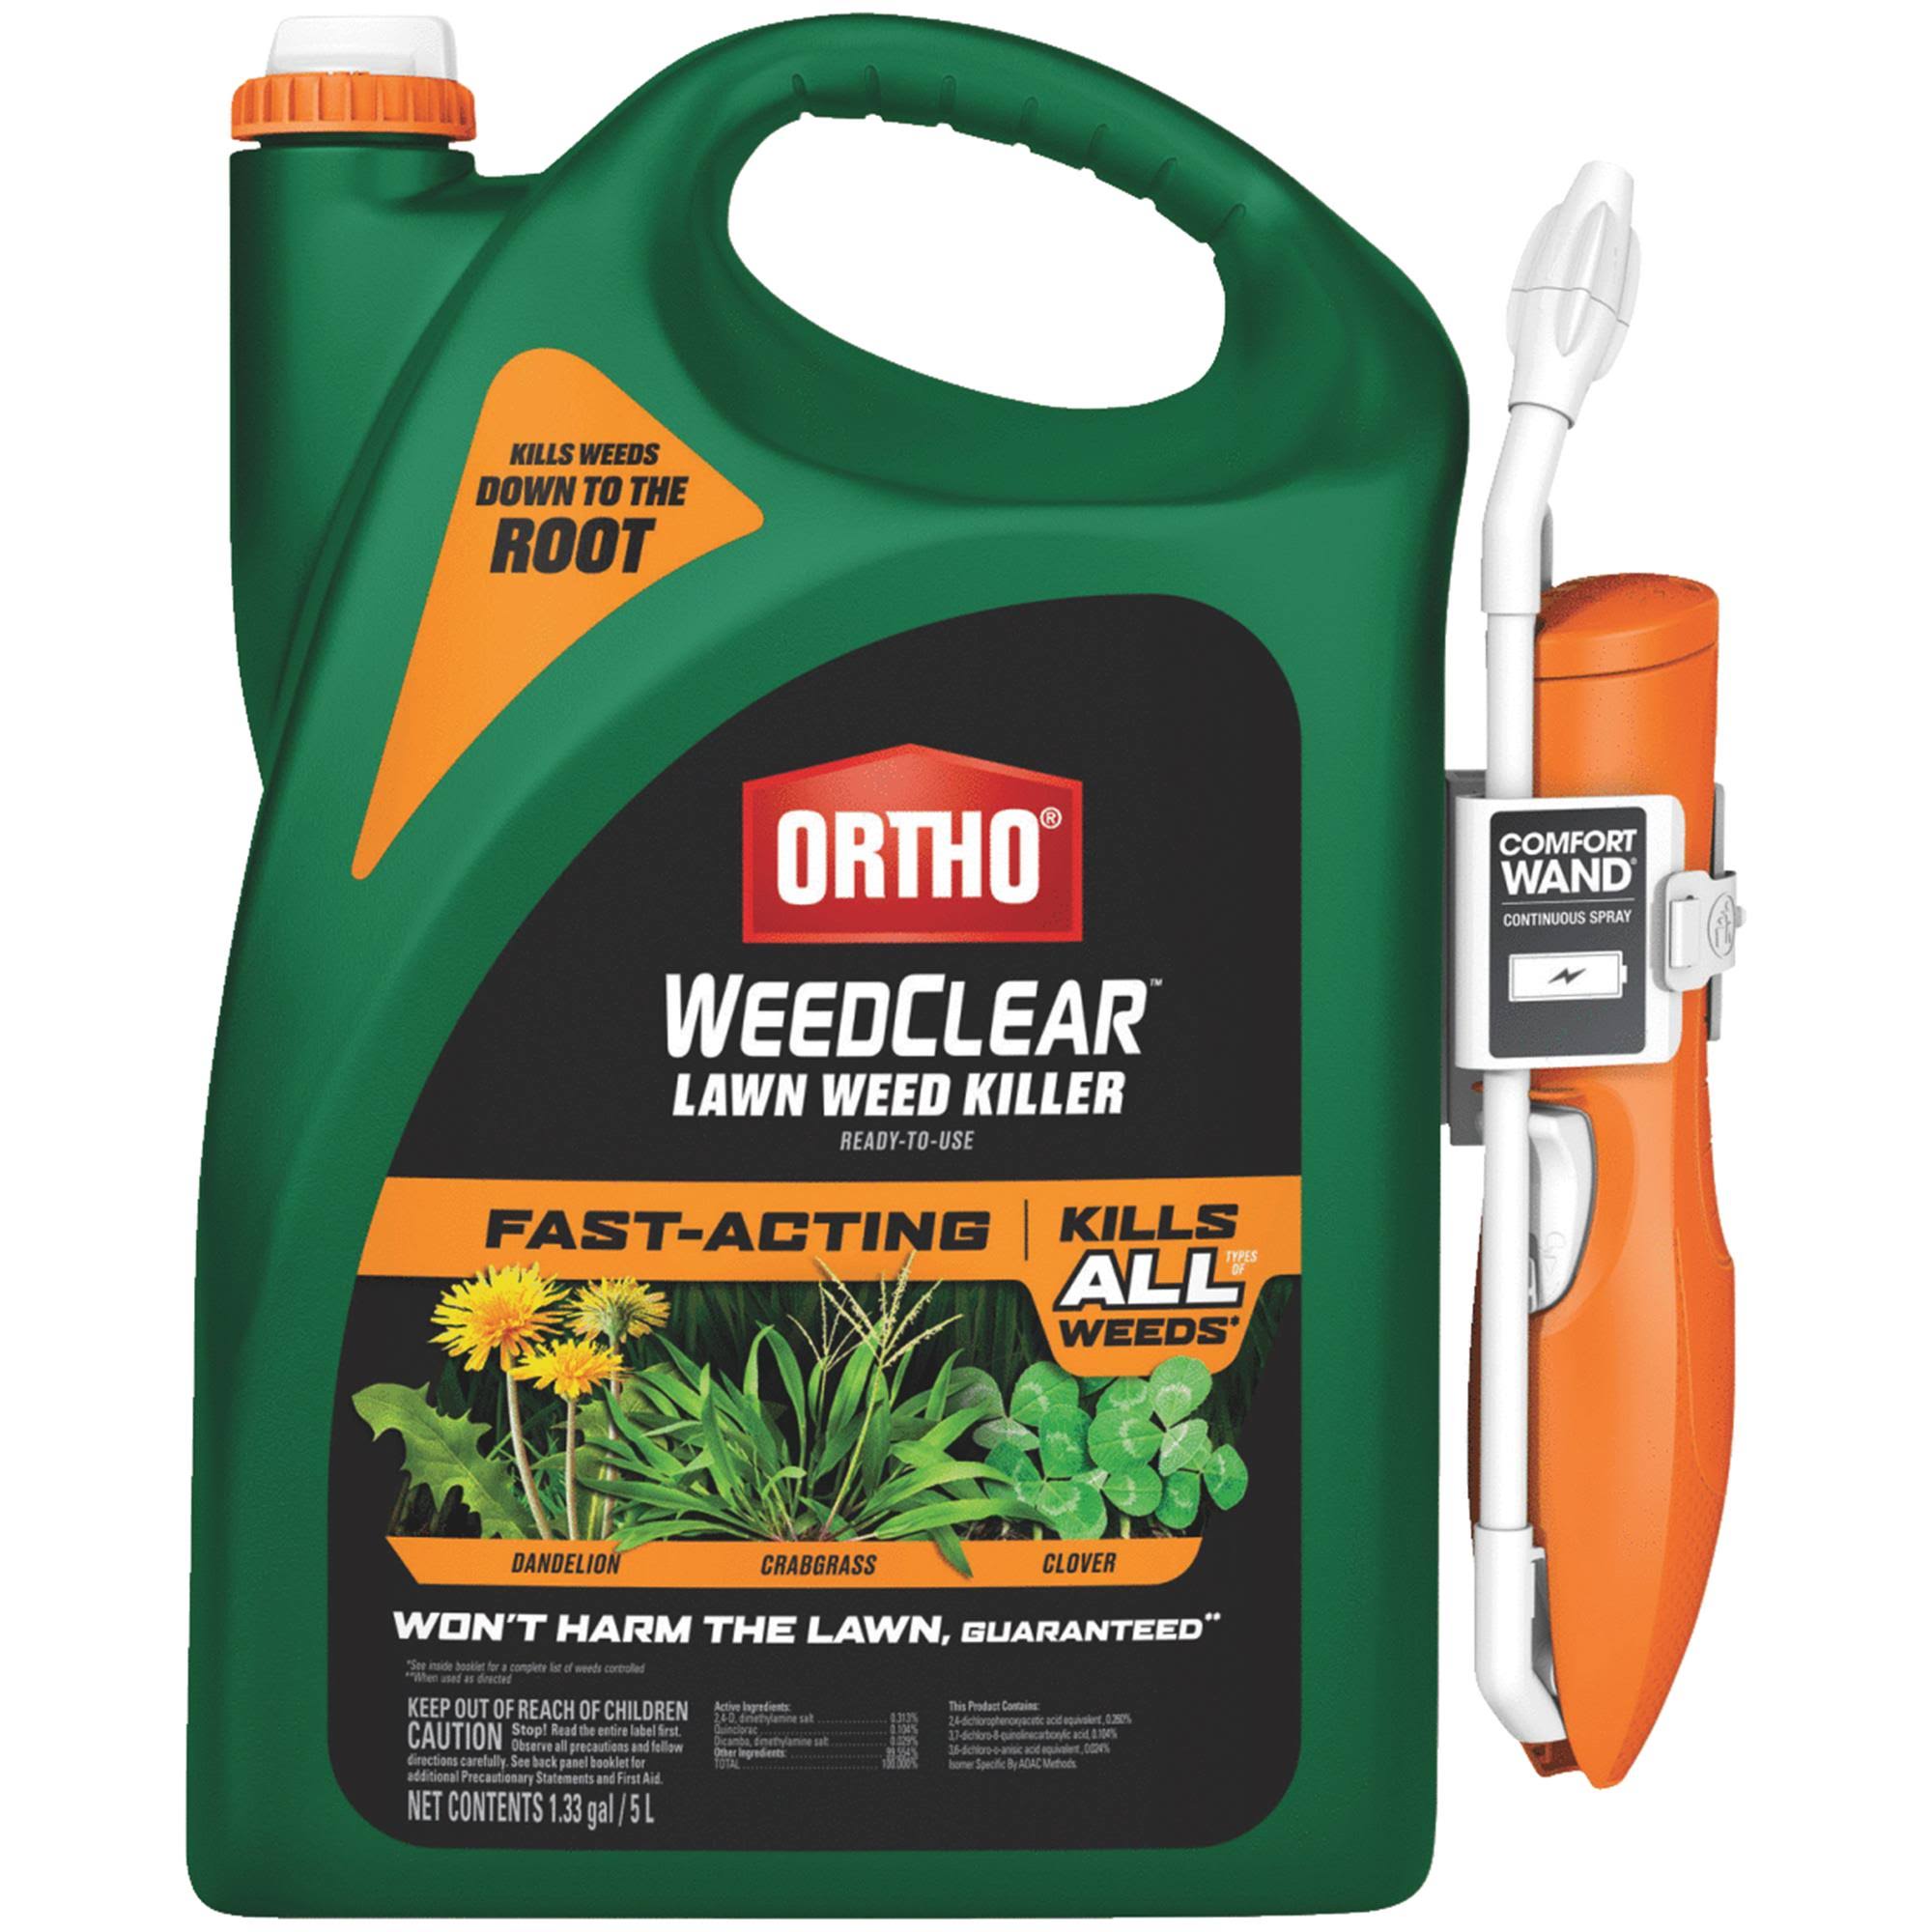 Ortho 1.33 Gal Ready-to-Use WeedClear Lawn Weed Killer